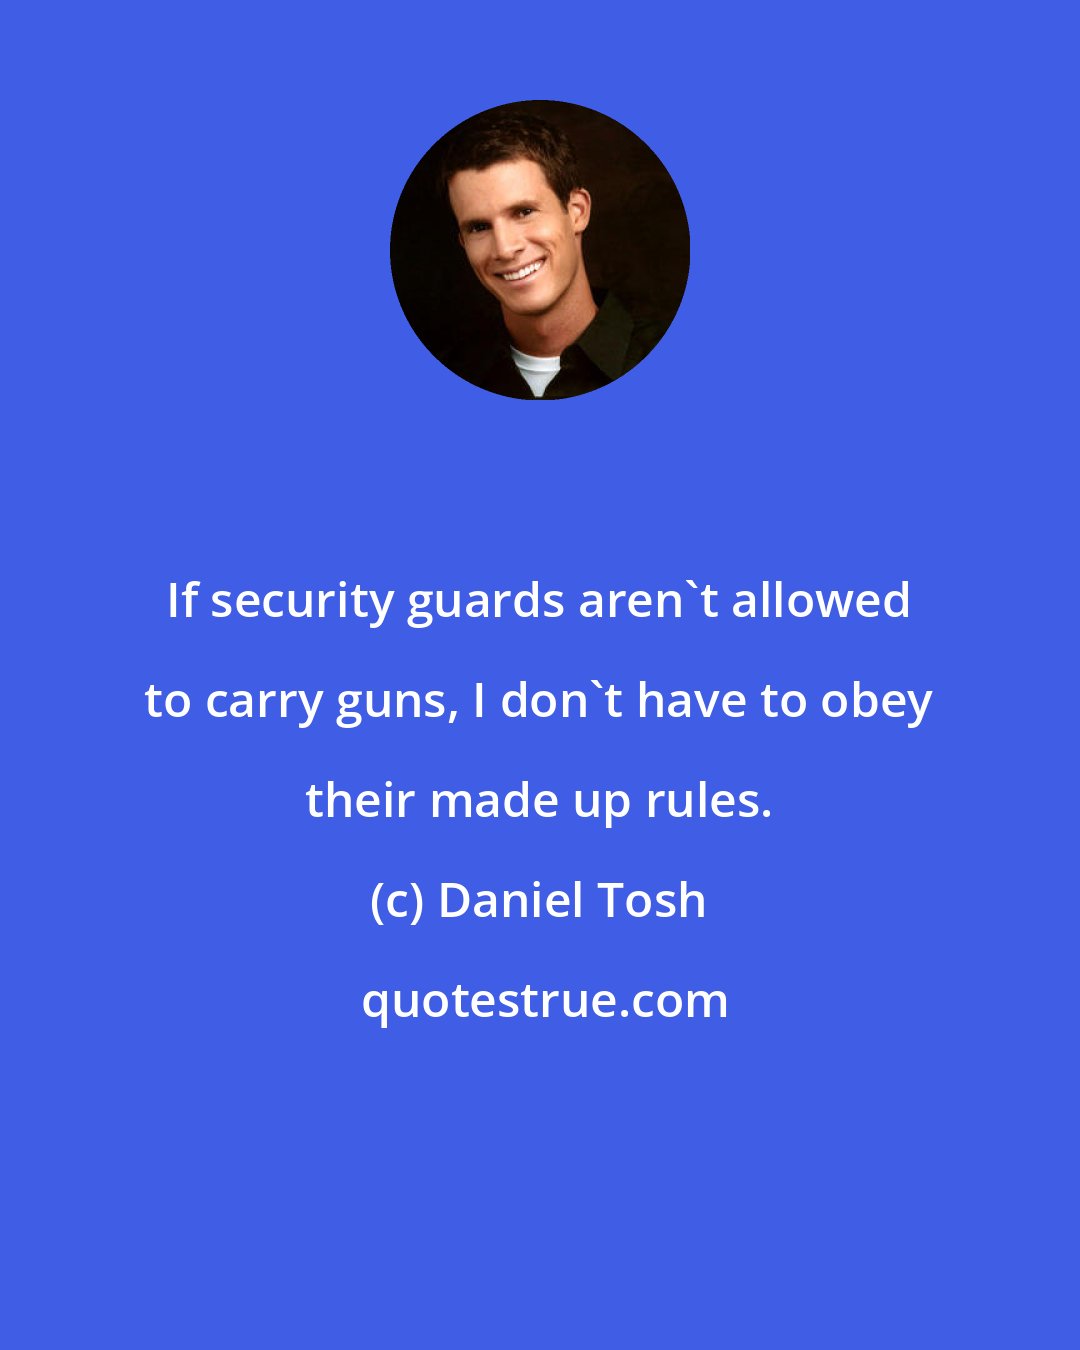 Daniel Tosh: If security guards aren't allowed to carry guns, I don't have to obey their made up rules.